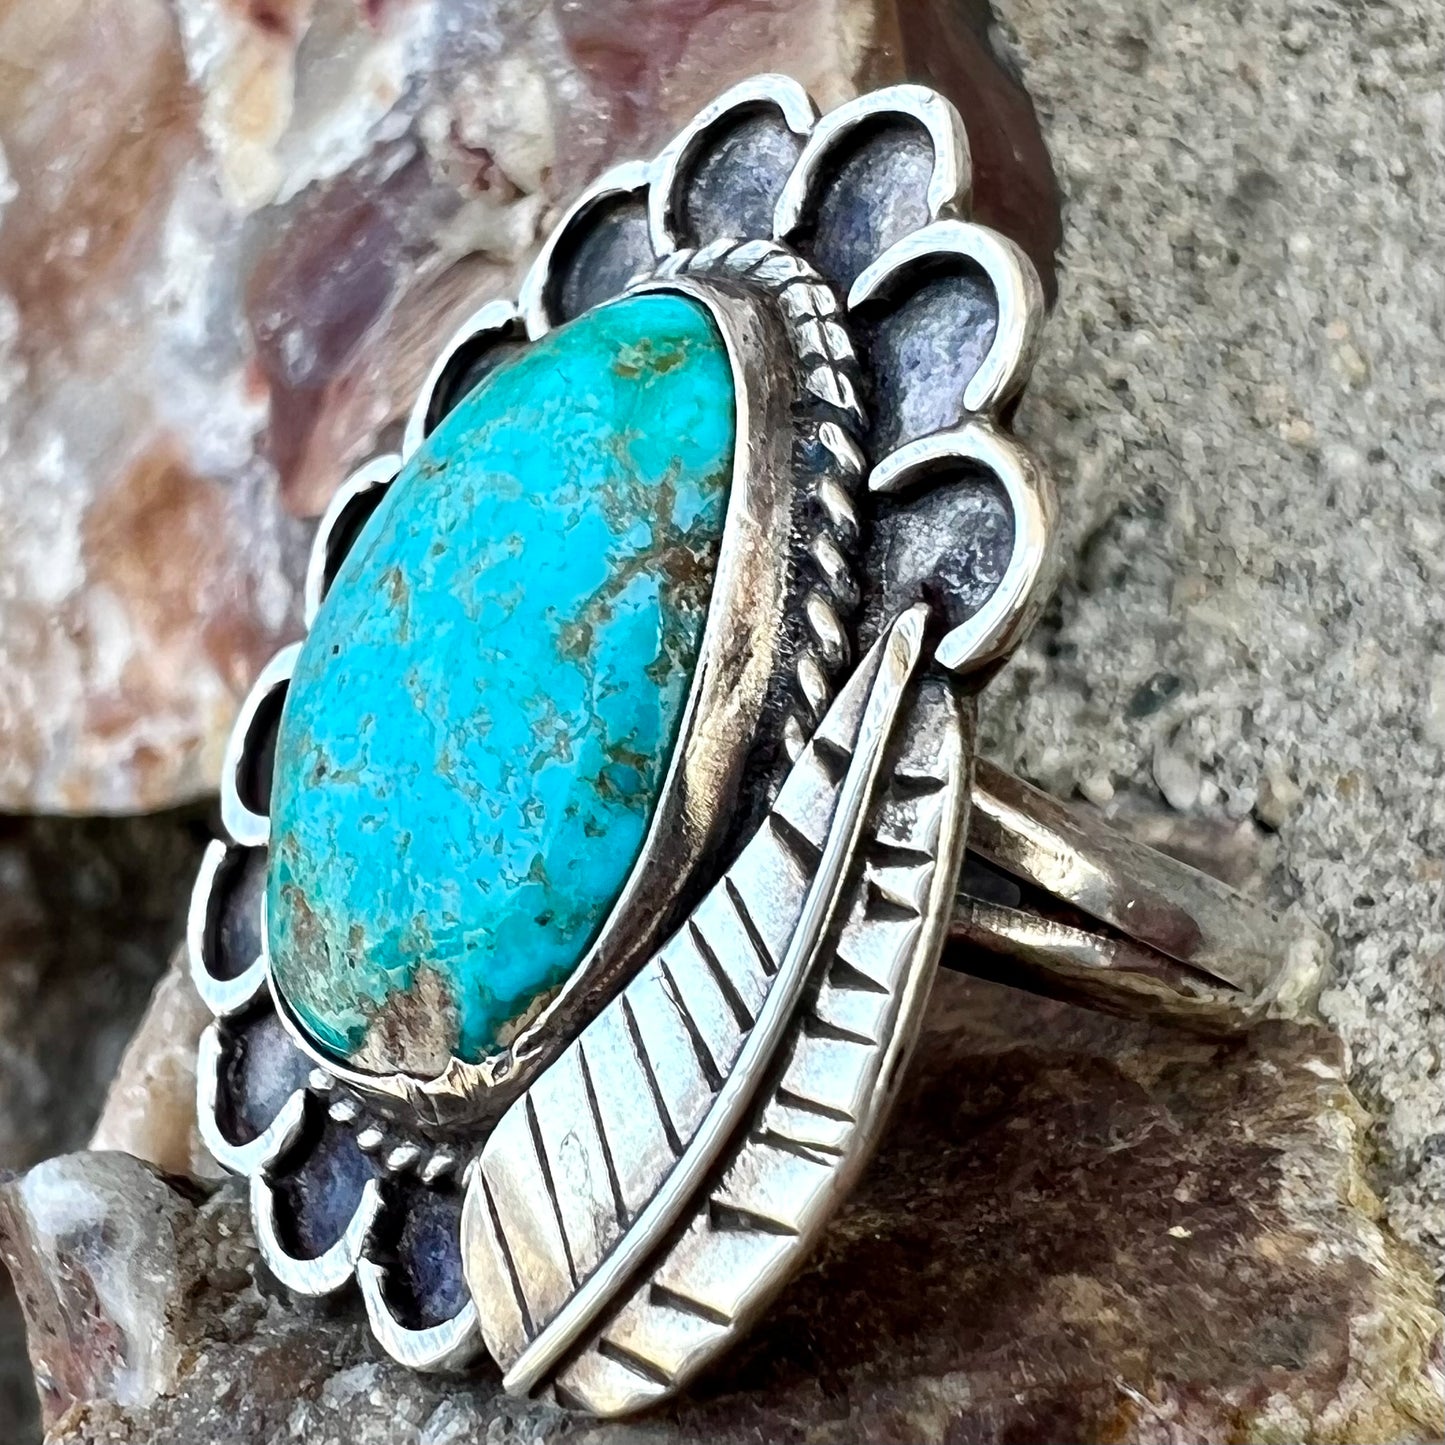 A sterling silver Navajo style ring.  The ring is set with a turquoise stone from Pilot Mountain.  There is a feather decoration next to the stone.